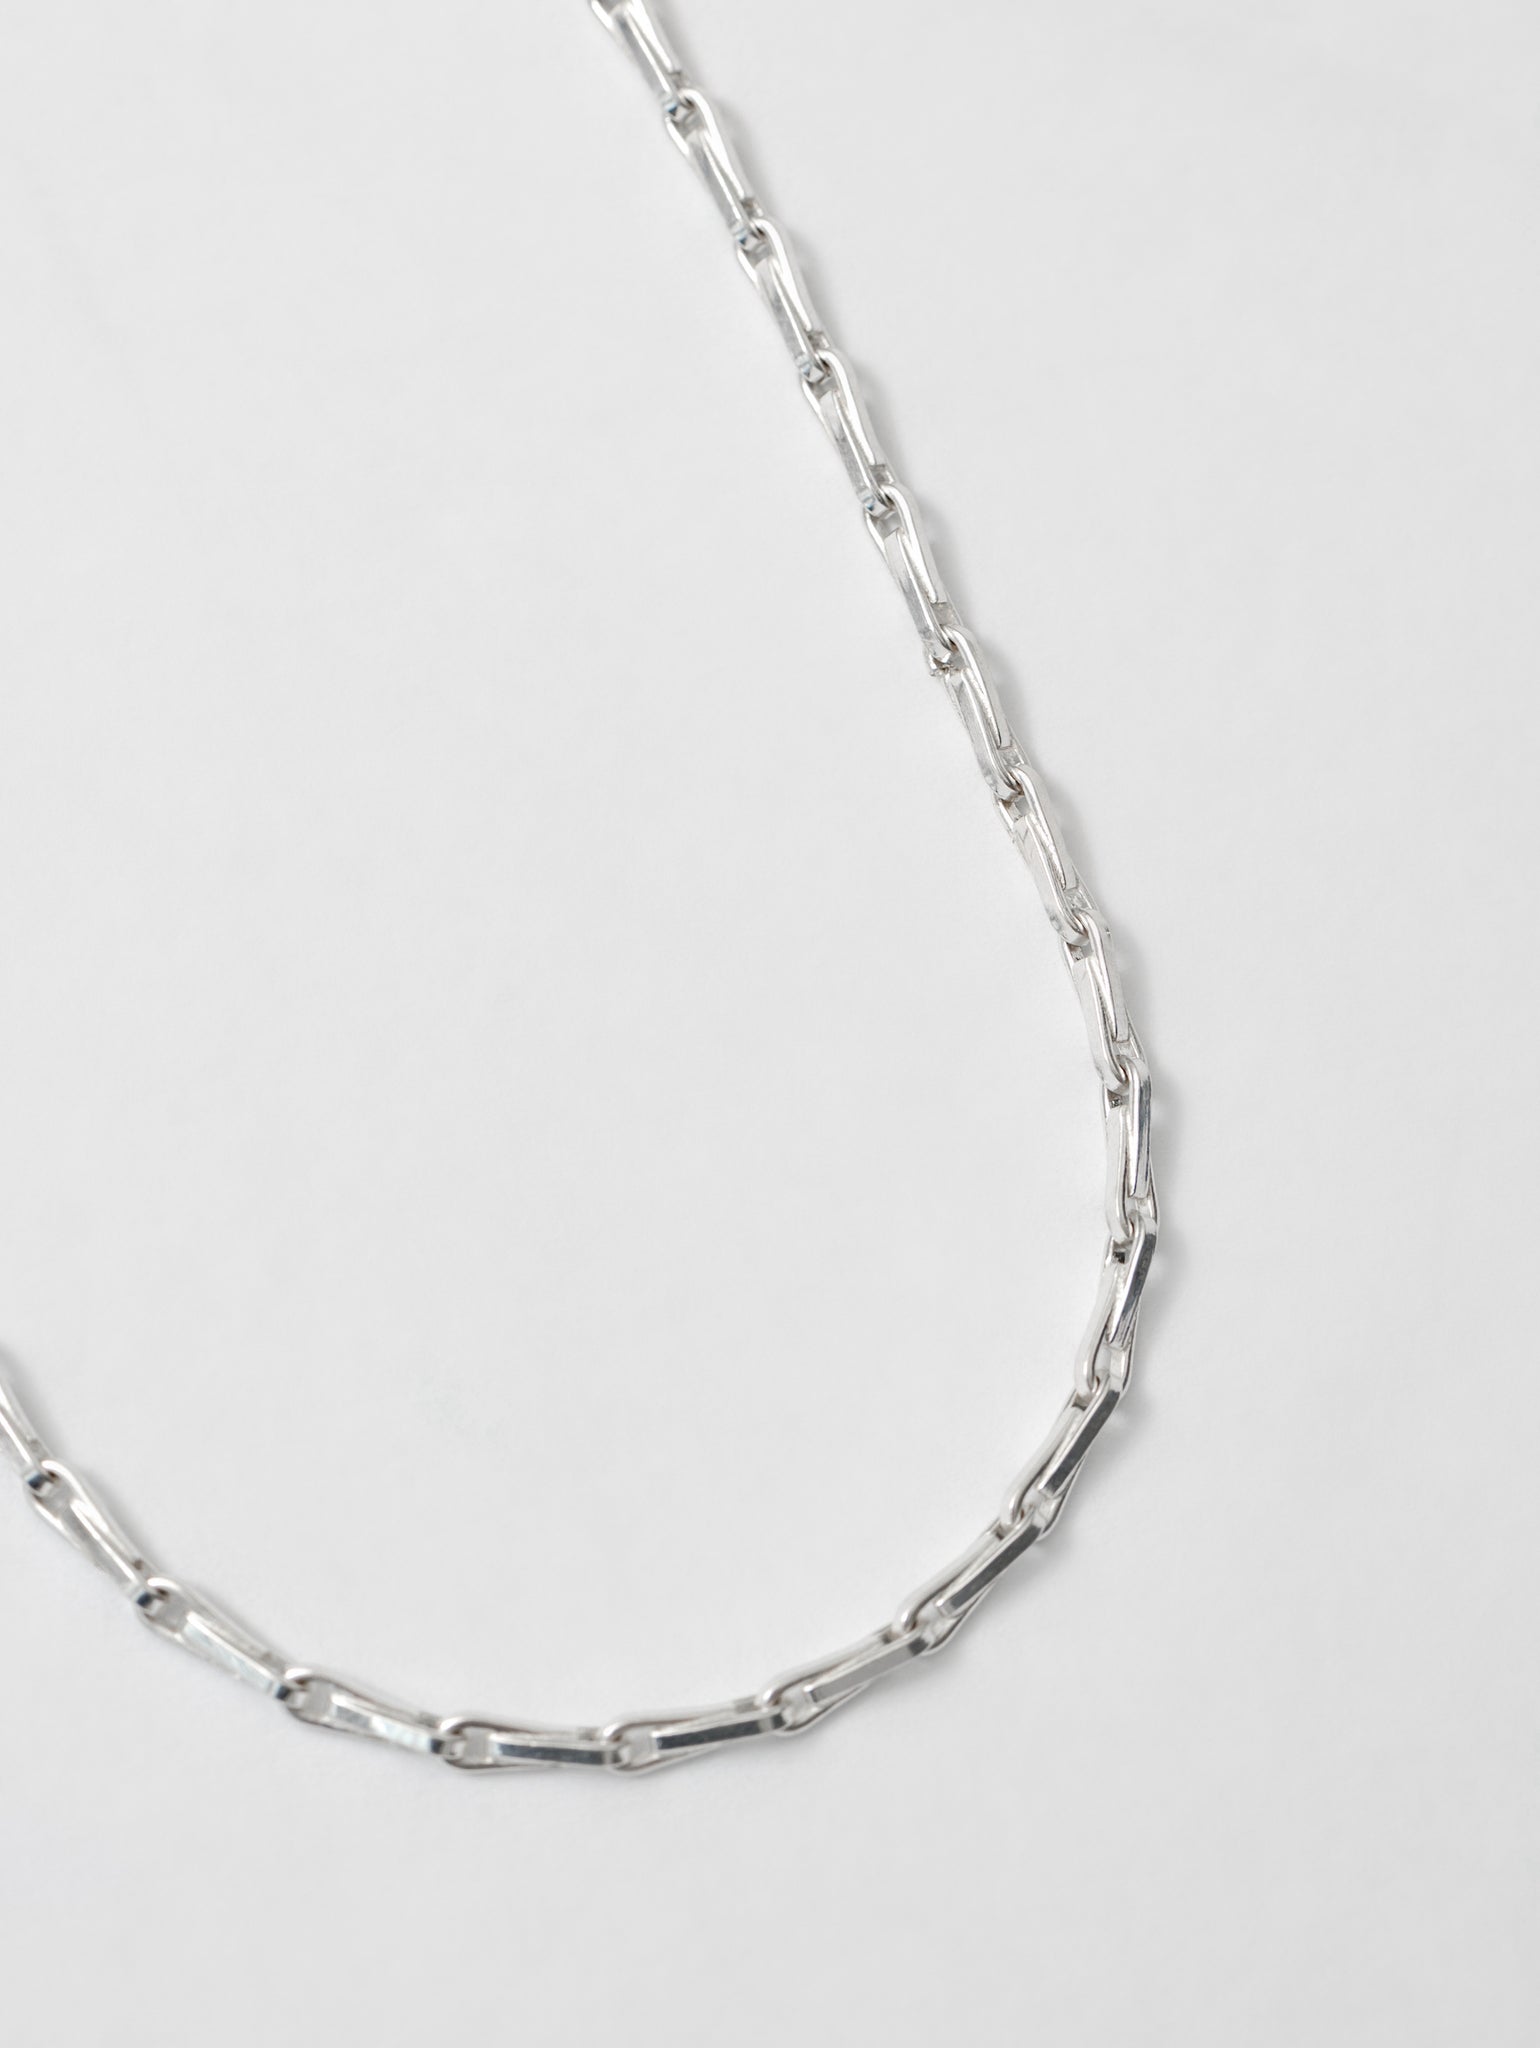 Wolf Circus Unique Unisex Chain Link Layering Necklace 925 Sterling Silver Jewelry